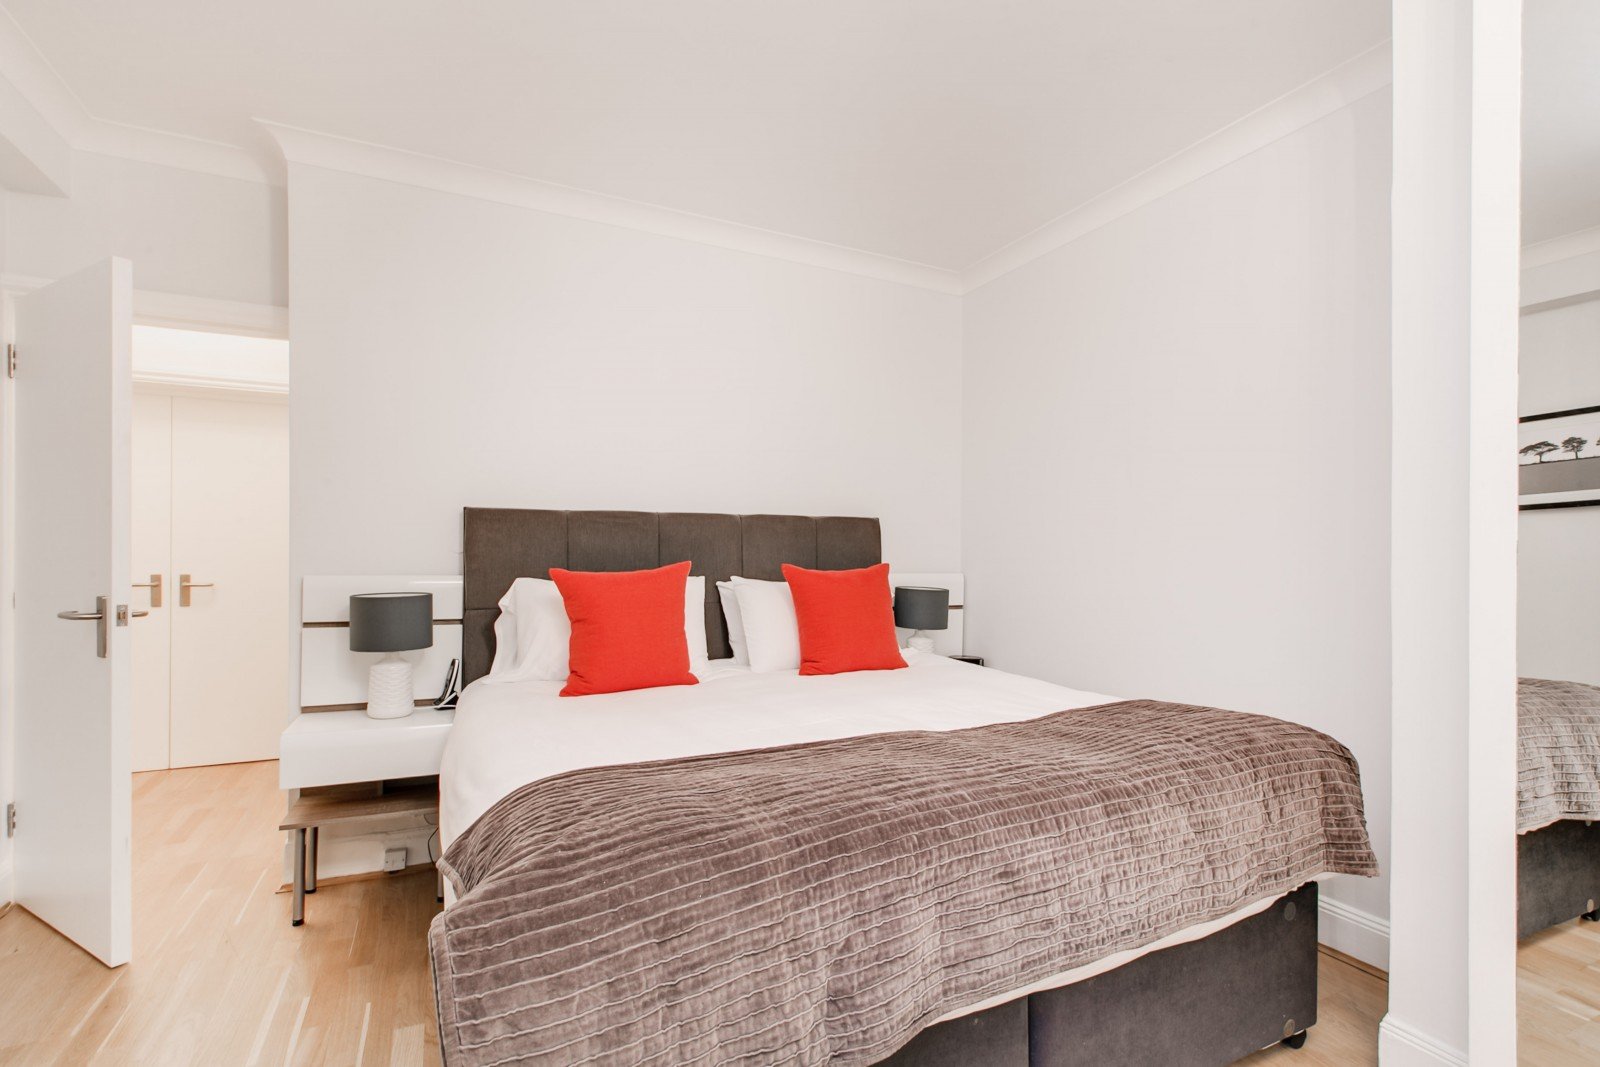 Looking-for-corporate-or-leisure-apartments-in-Marylebone?-why-not-book-our-Marylebone-Shortlet-Apartments-at-Chiltern-Street?-Call-today-for-great-rates.